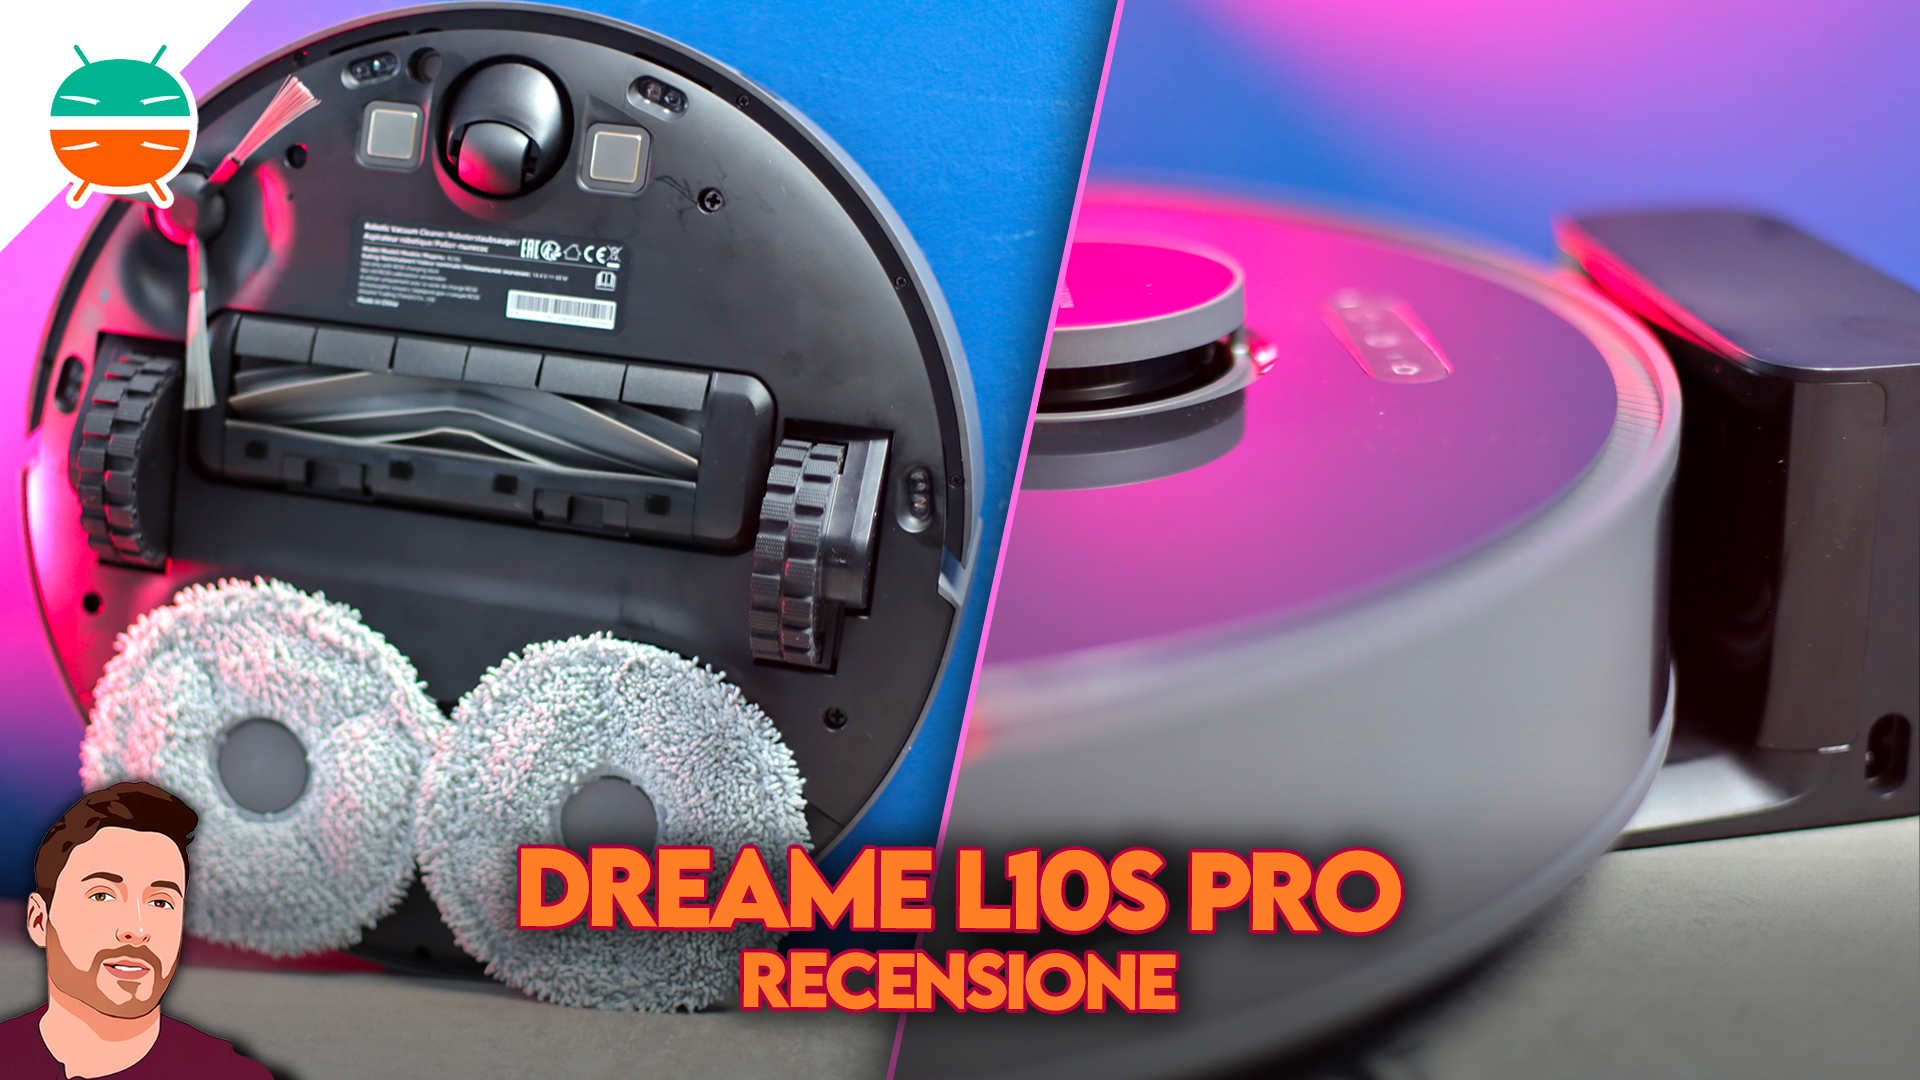 Dreame L10s Pro review: one of a kind - GizChina.it